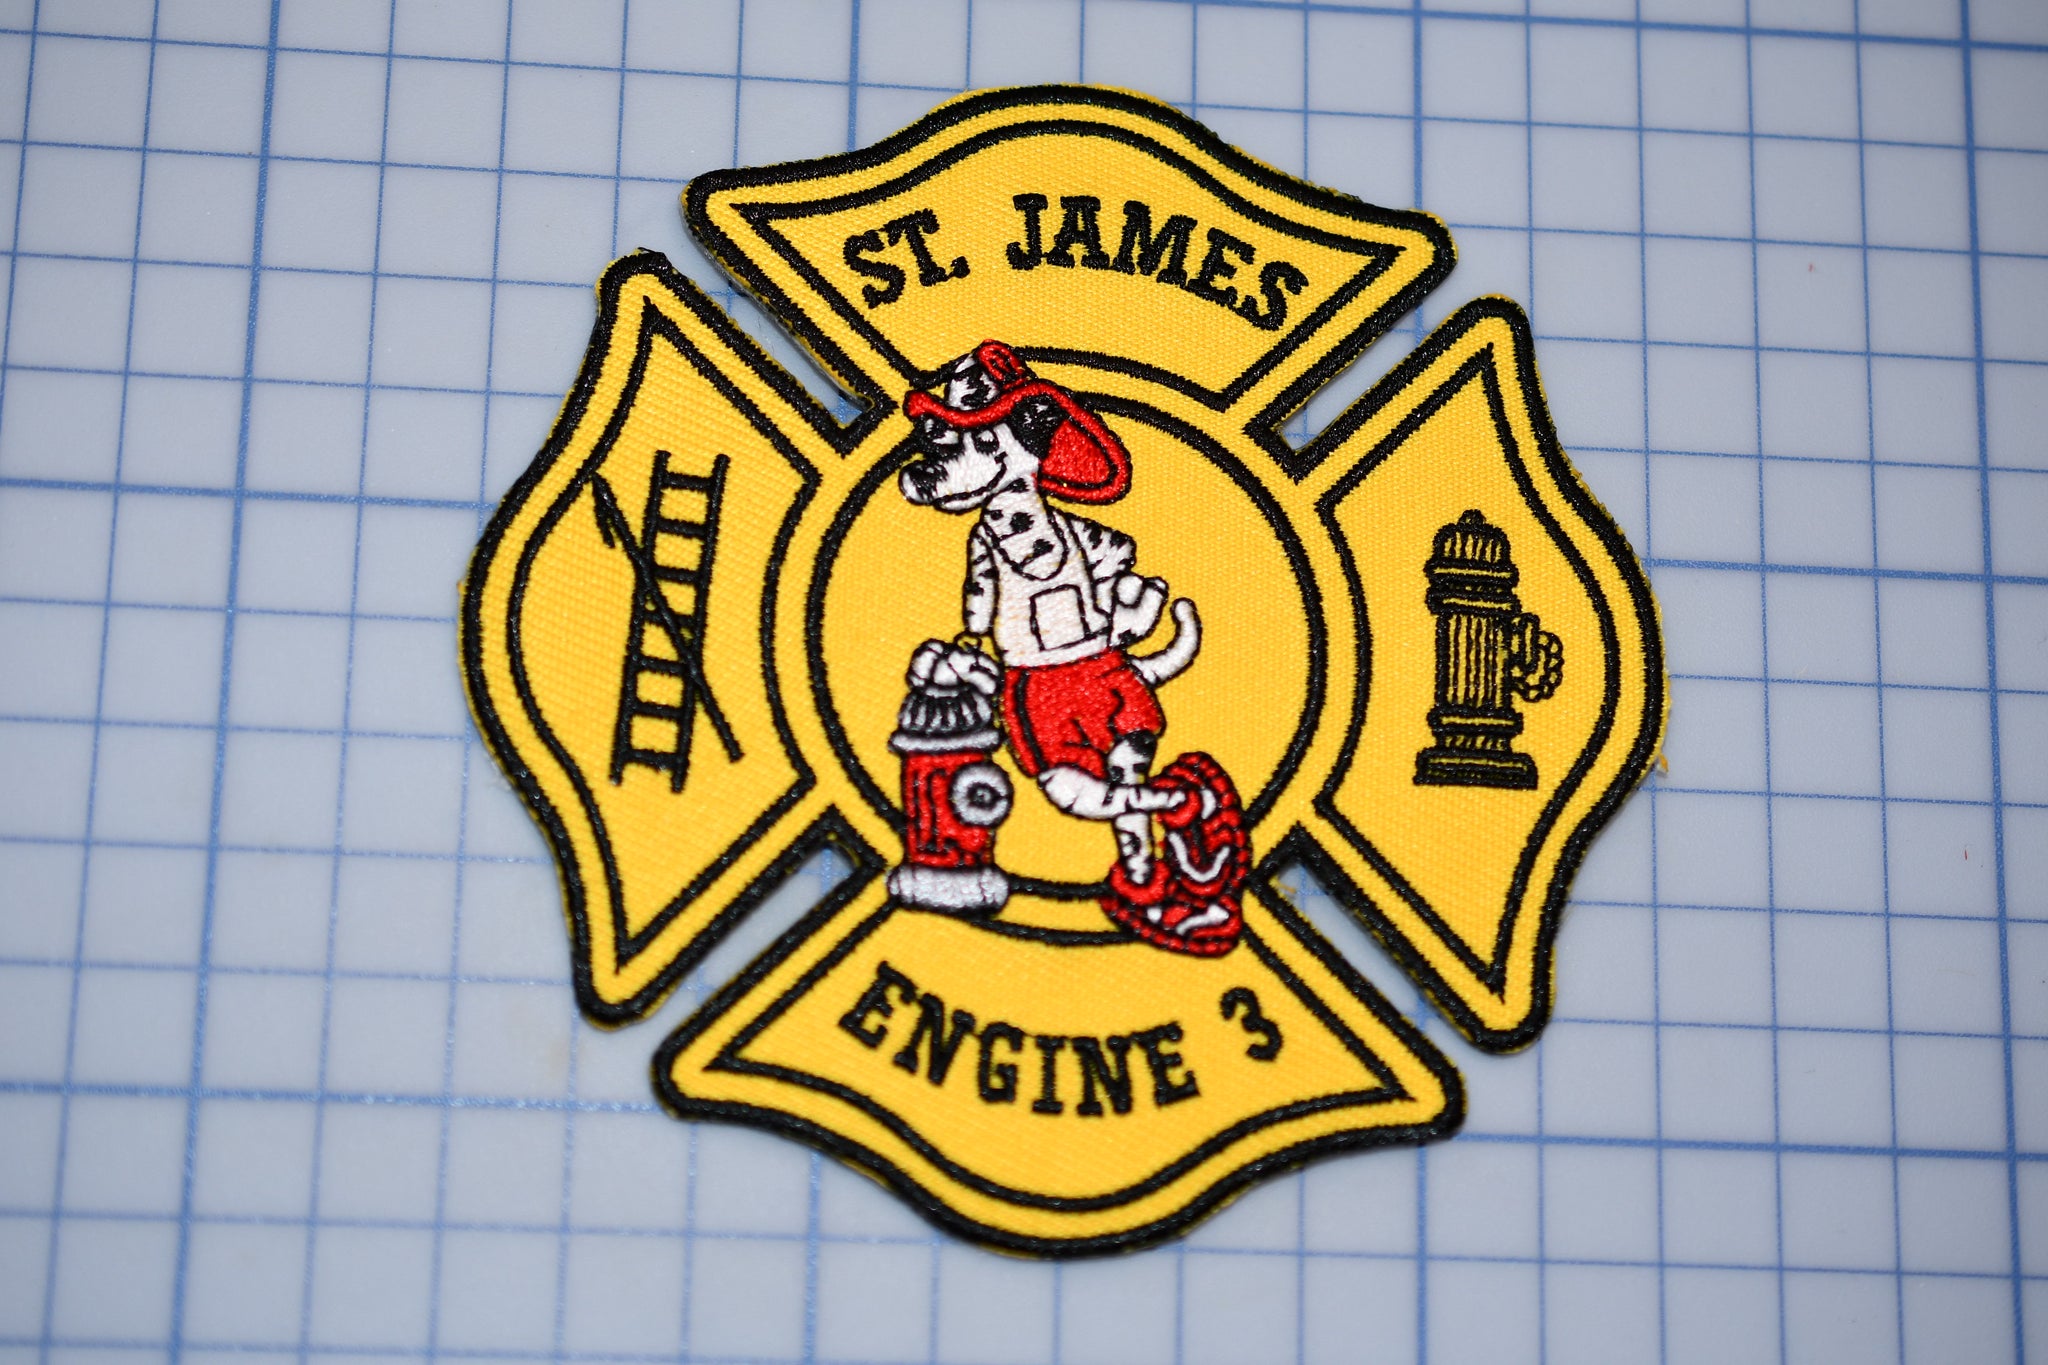 St. James New York Fire Department Engine 3 Patch (B19)